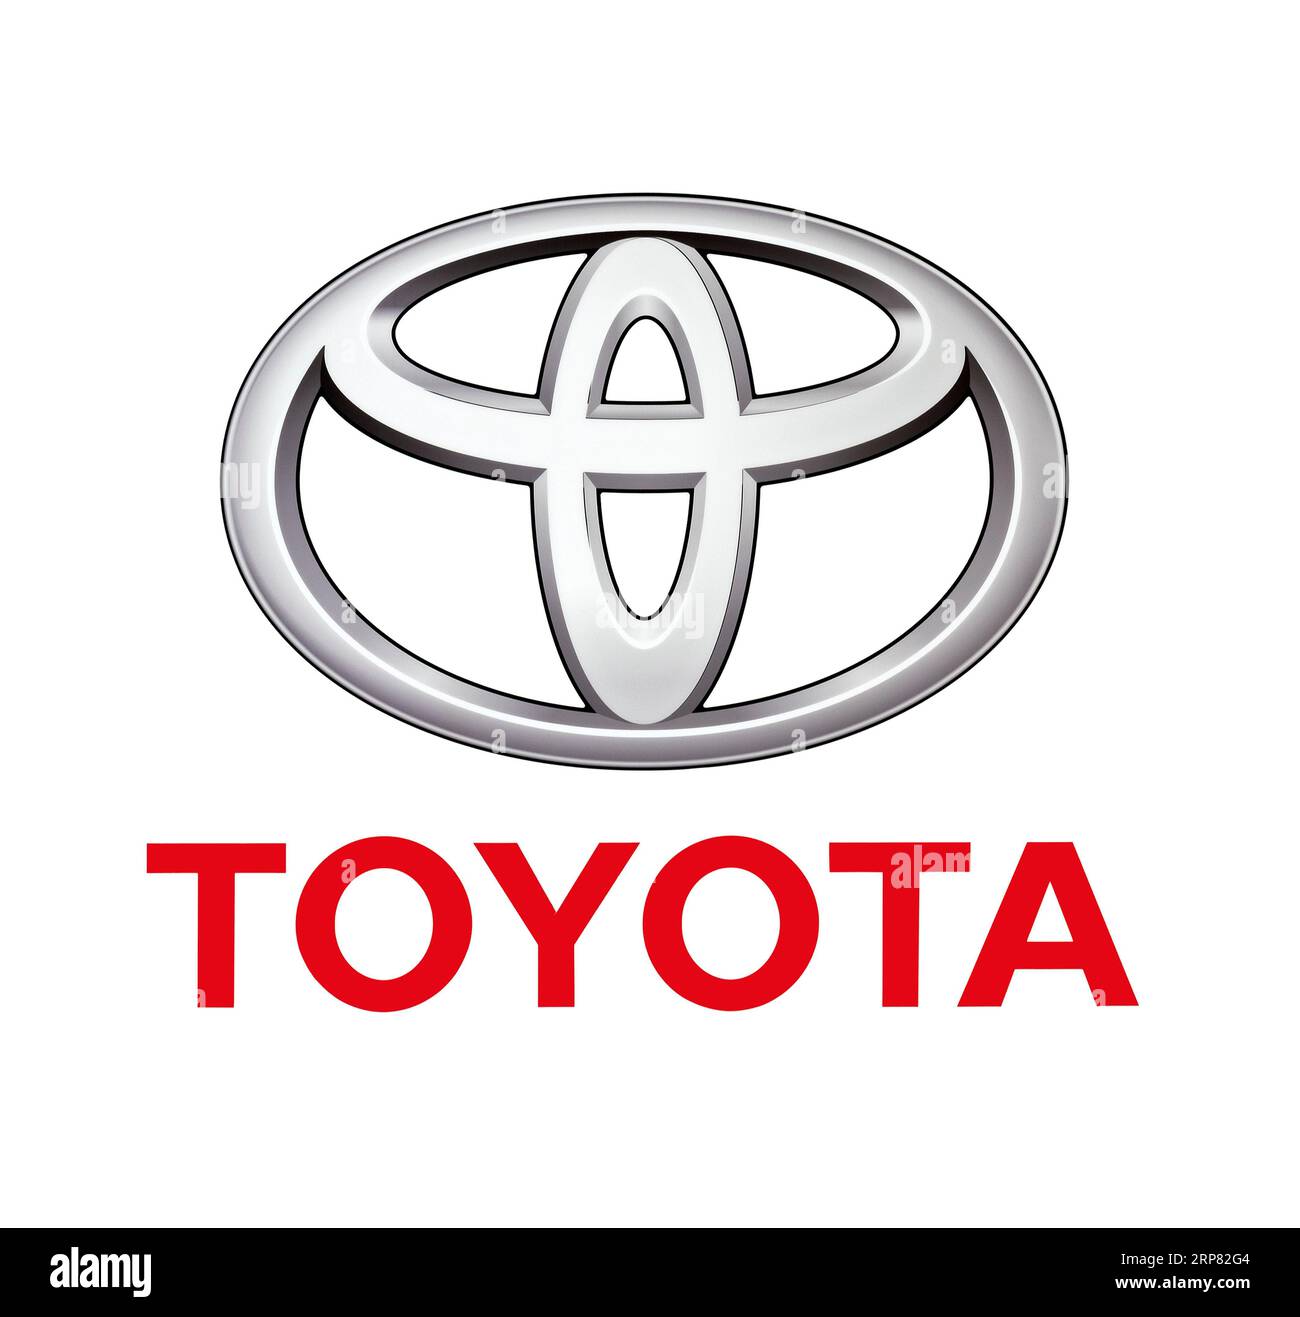 Logo of the car brand Toyota, car, motor vehicle, cut-out on white background Stock Photo